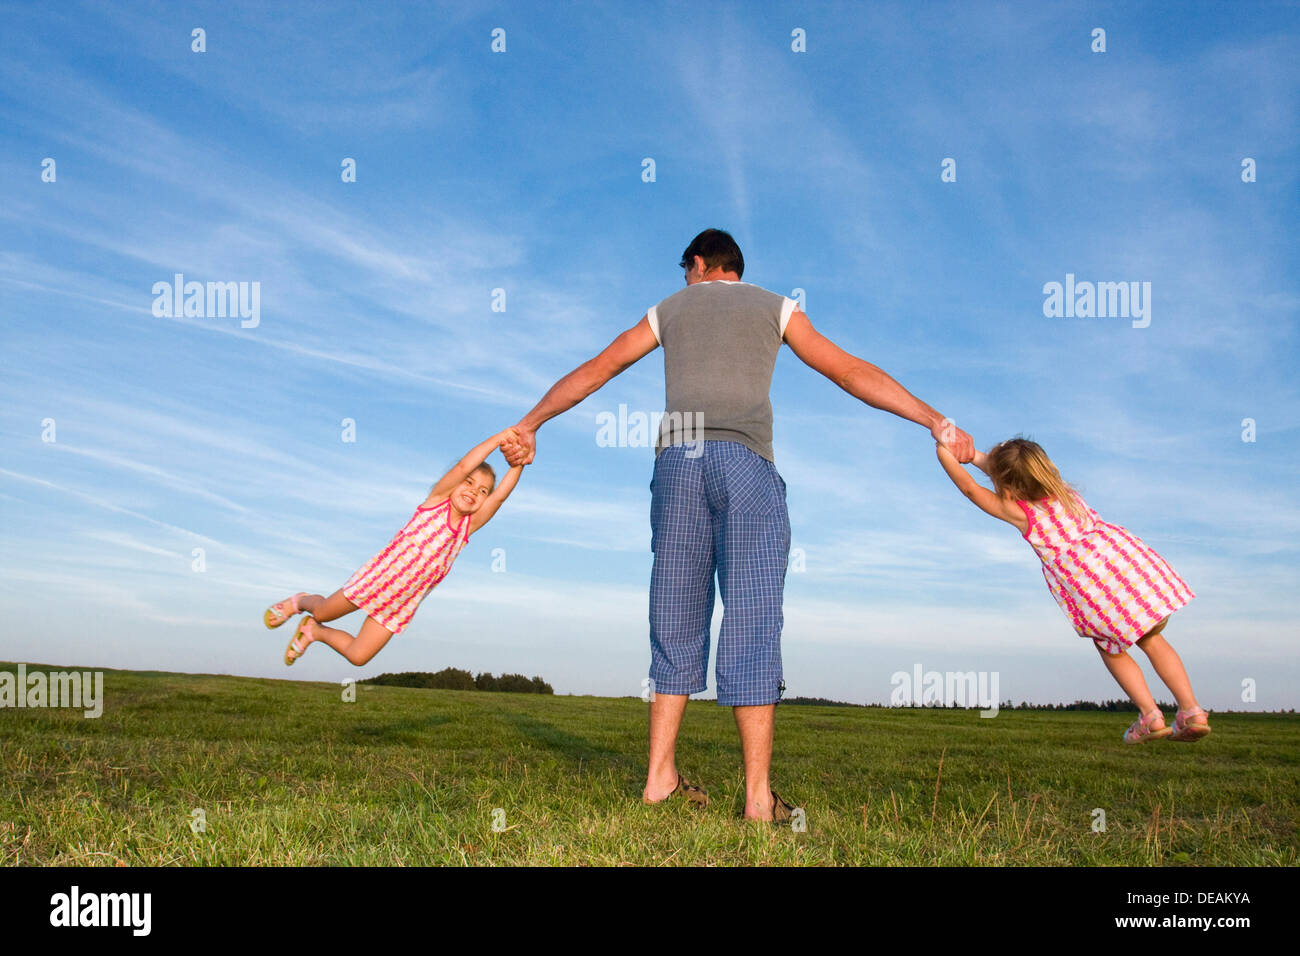 Twin girls, 3 years, playing with their father, 29 years, outdoors Stock Photo